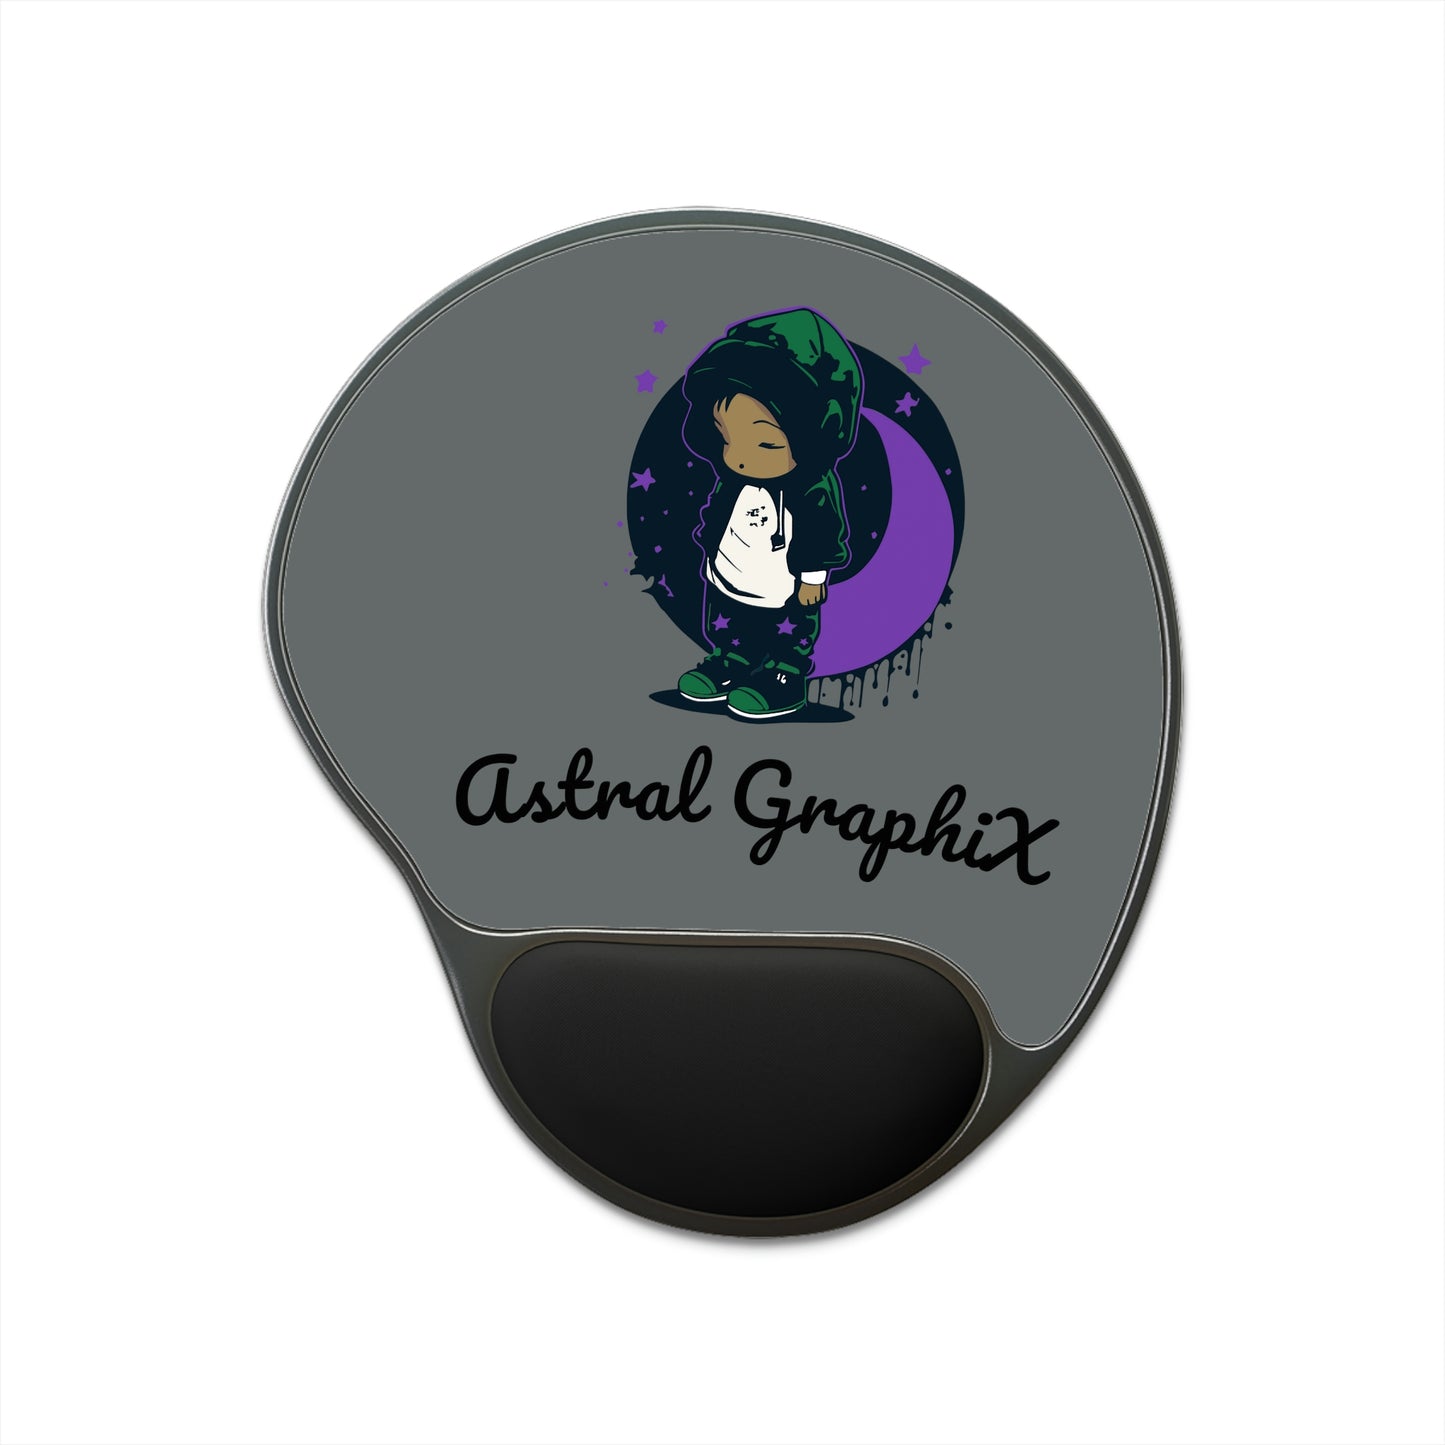 Astral GraphiX Logo Collection - Mouse Pad With Wrist Rest